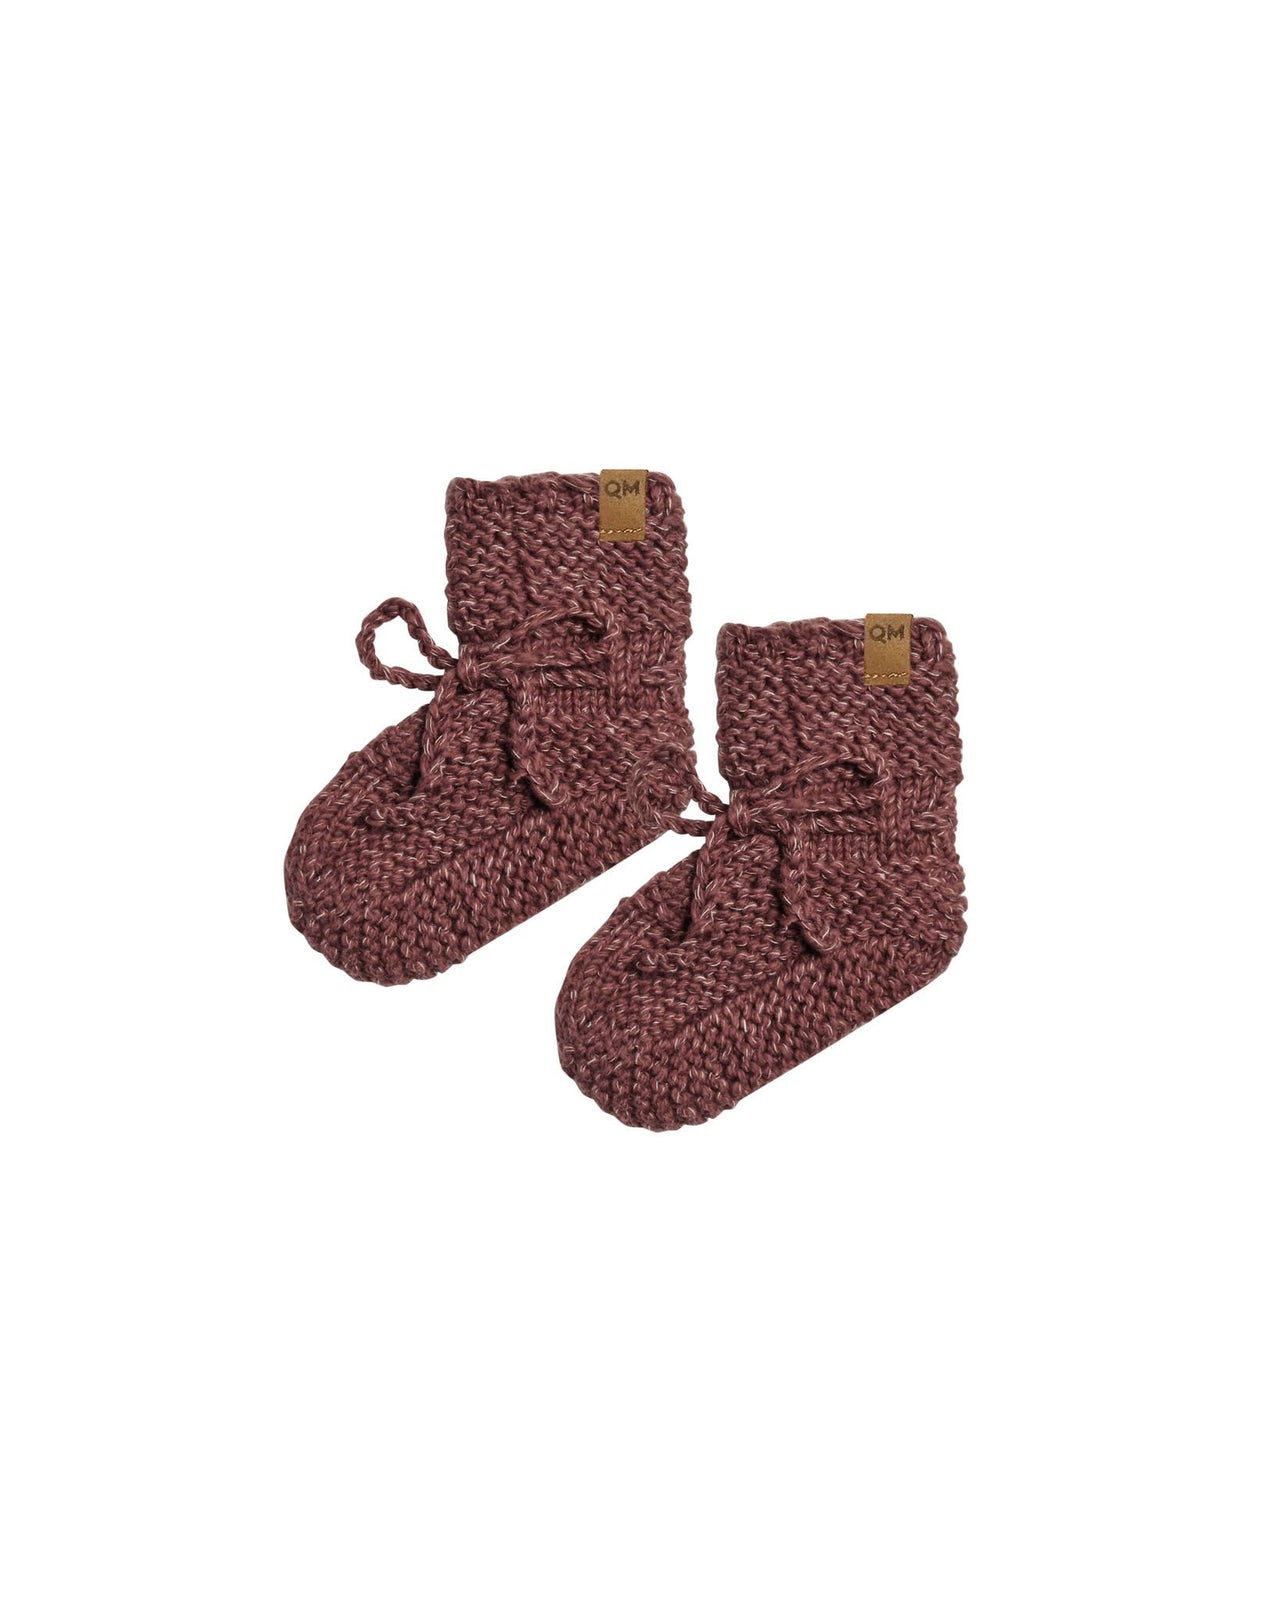 Quincy Mae Heathered Knit Booties, Heathered Plum